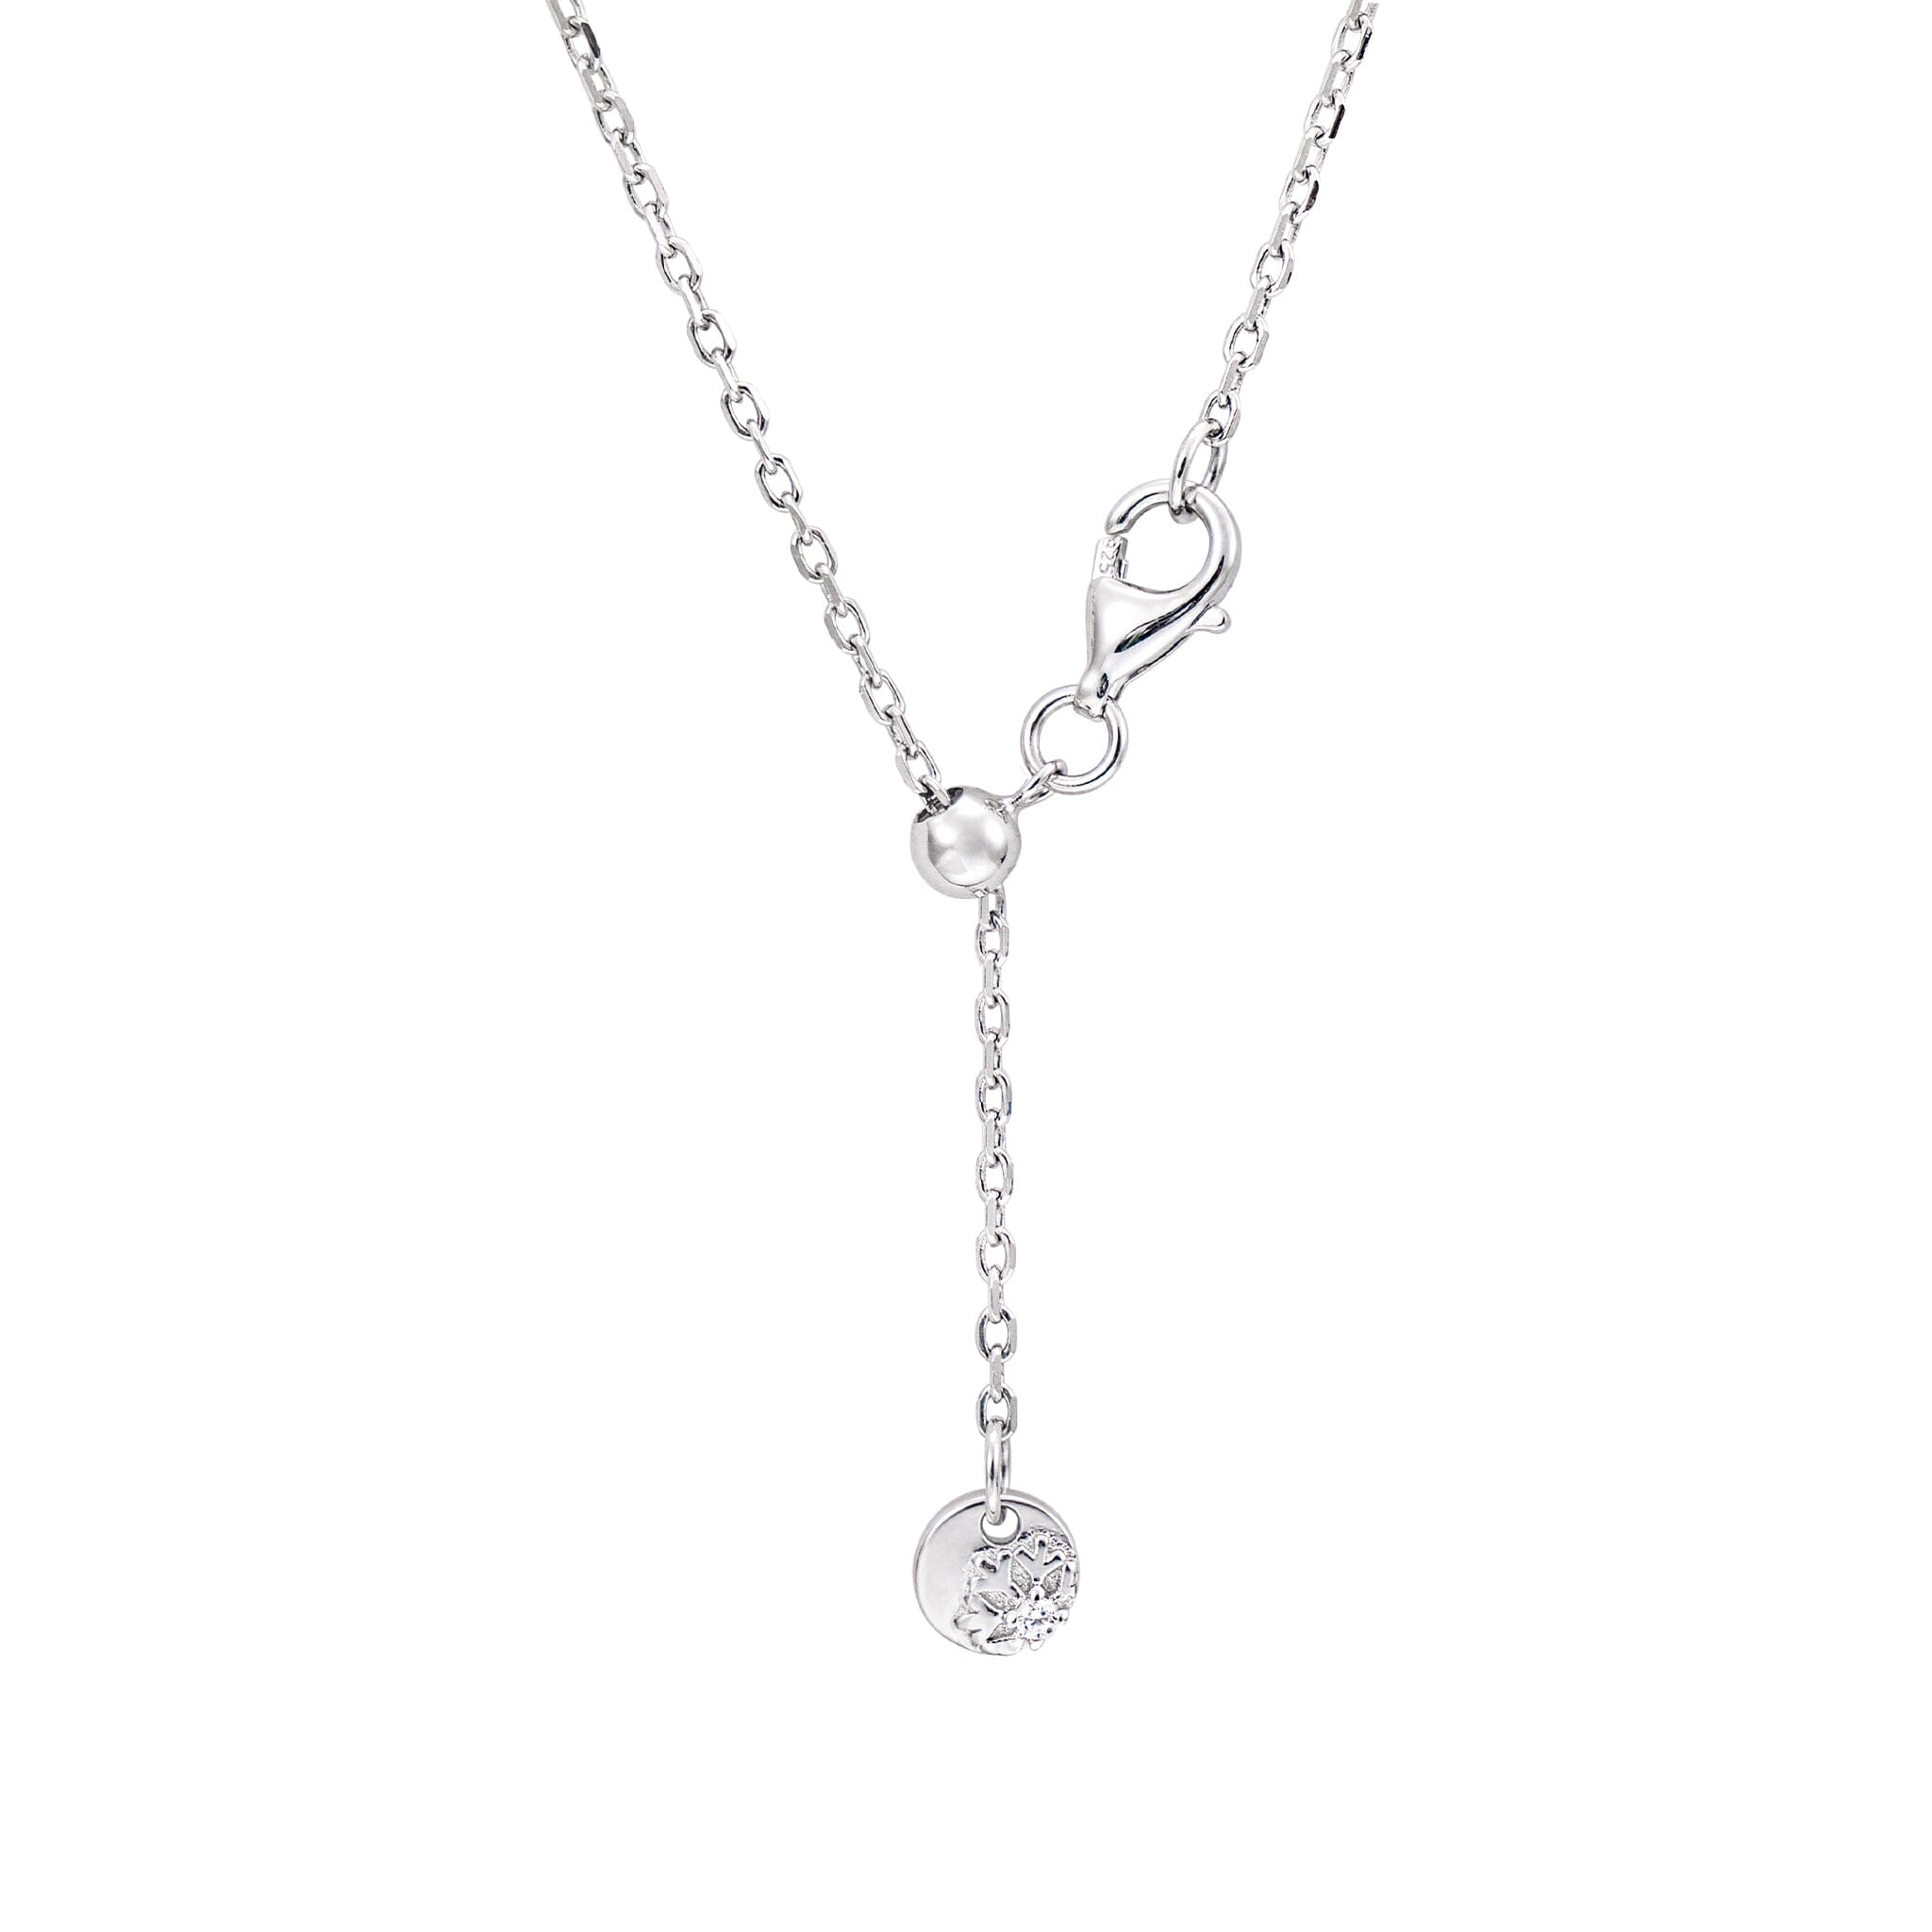 Women's Moving Ball Necklace with Moonstone Necklaces WAA FASHION GROUP 